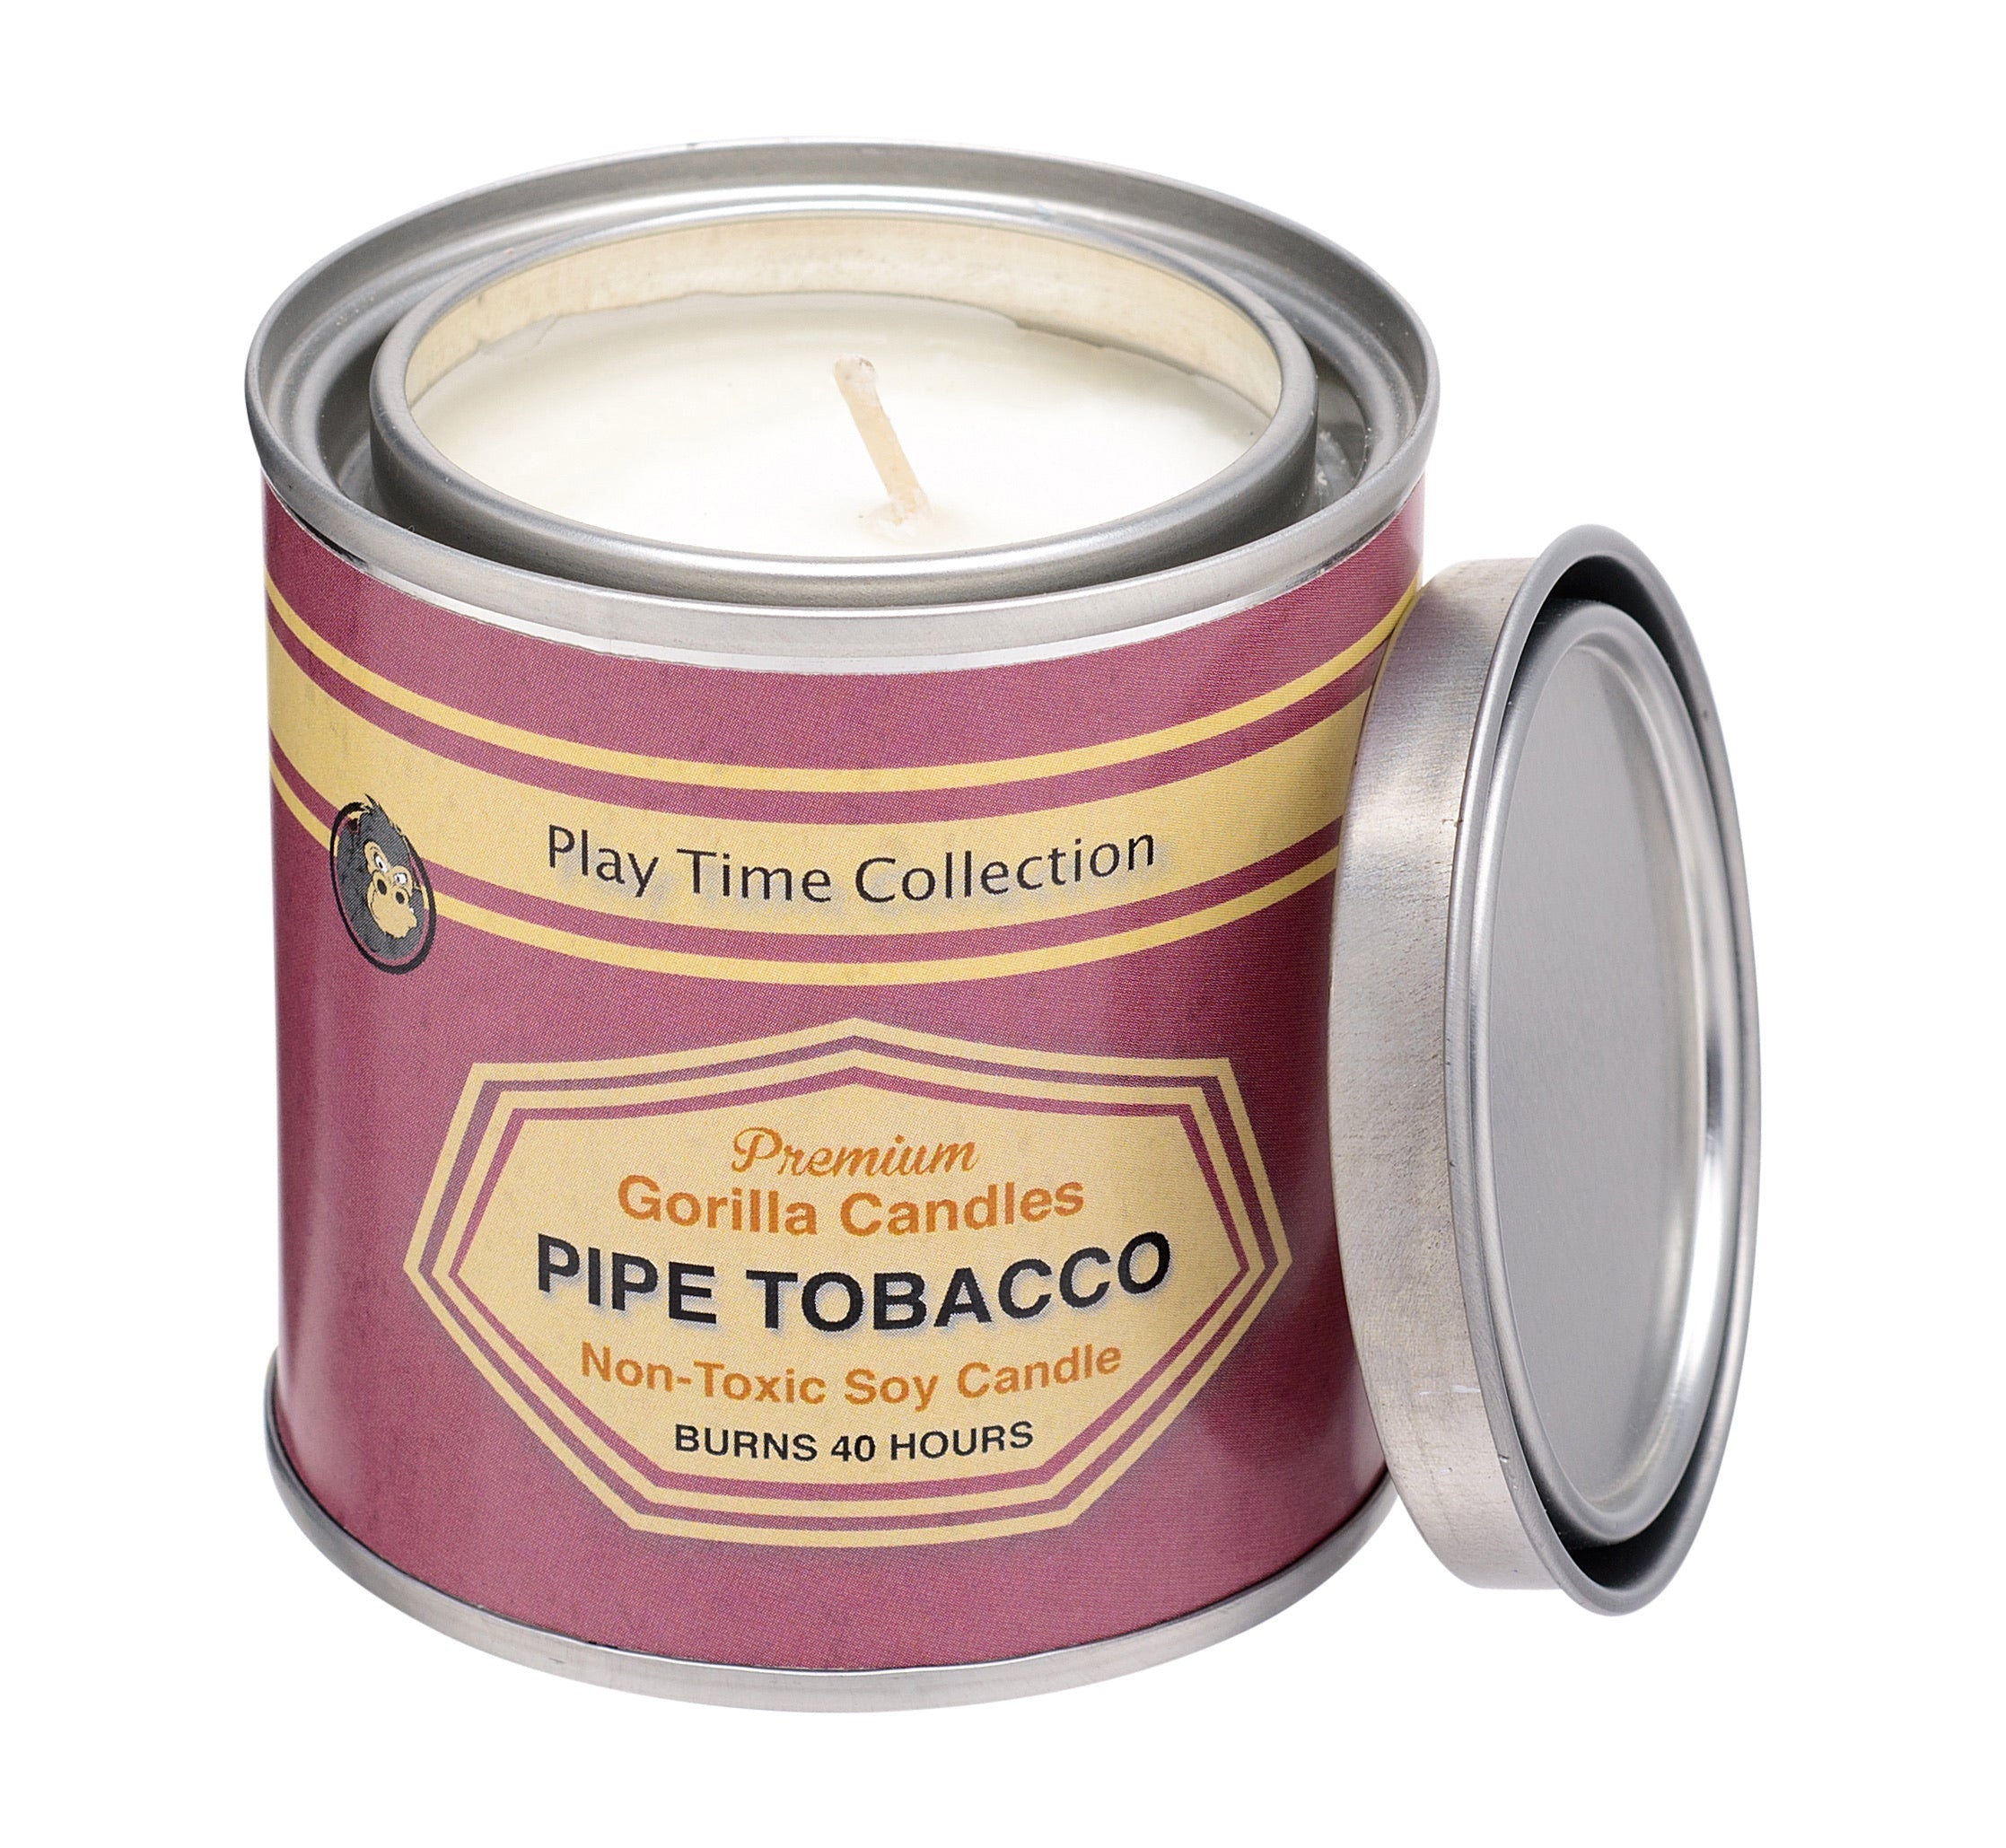 Pipe Tobacco by Gorilla Candles™